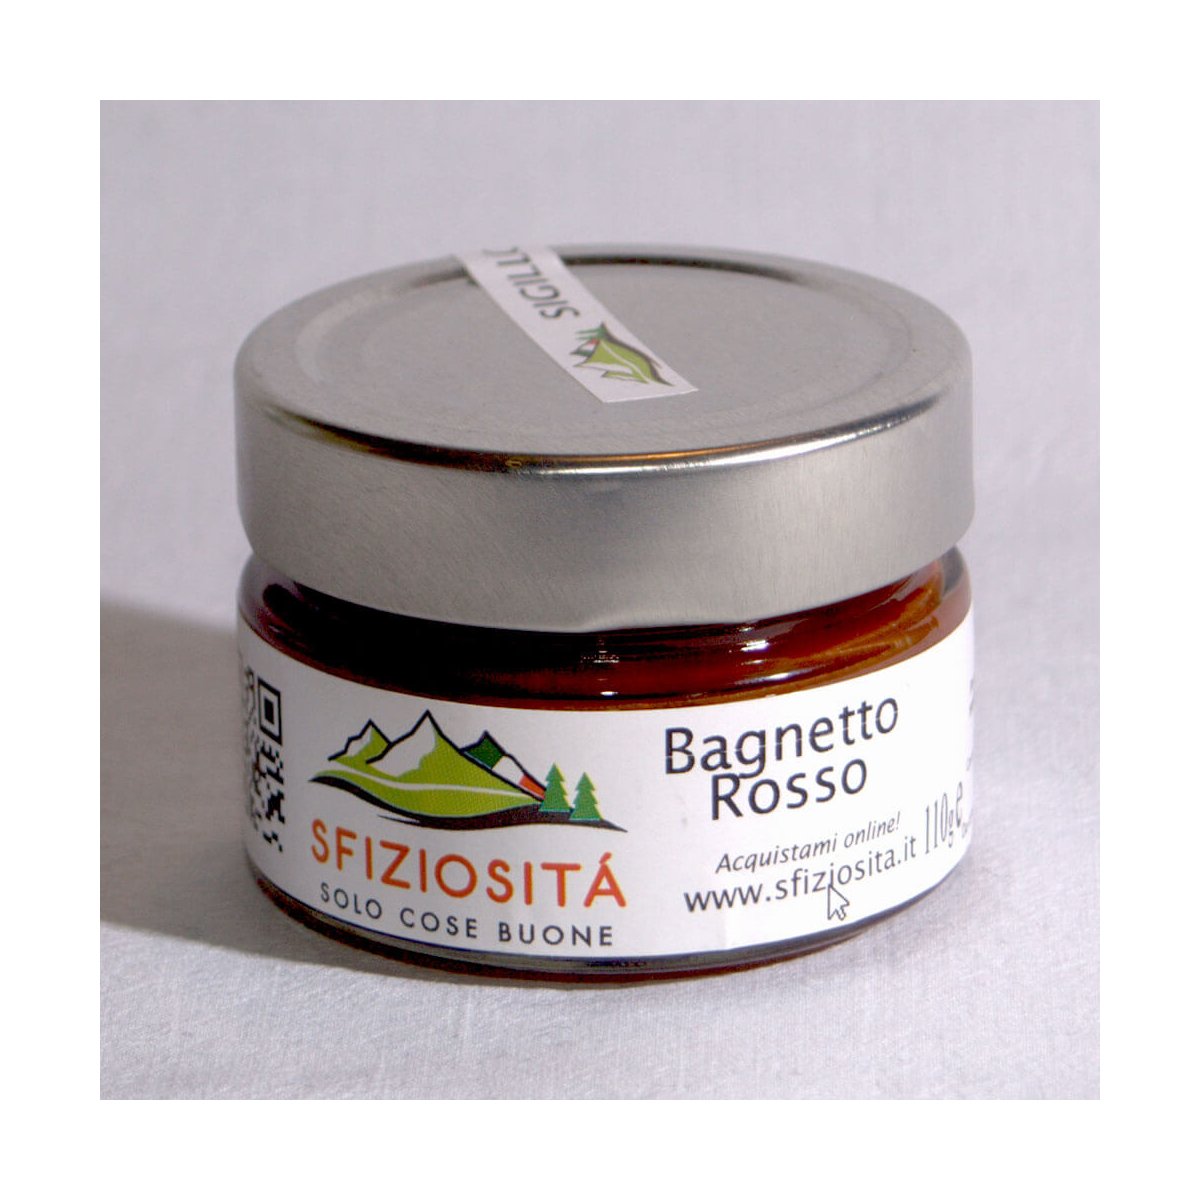 Bagnetto Rosso Gr. 110